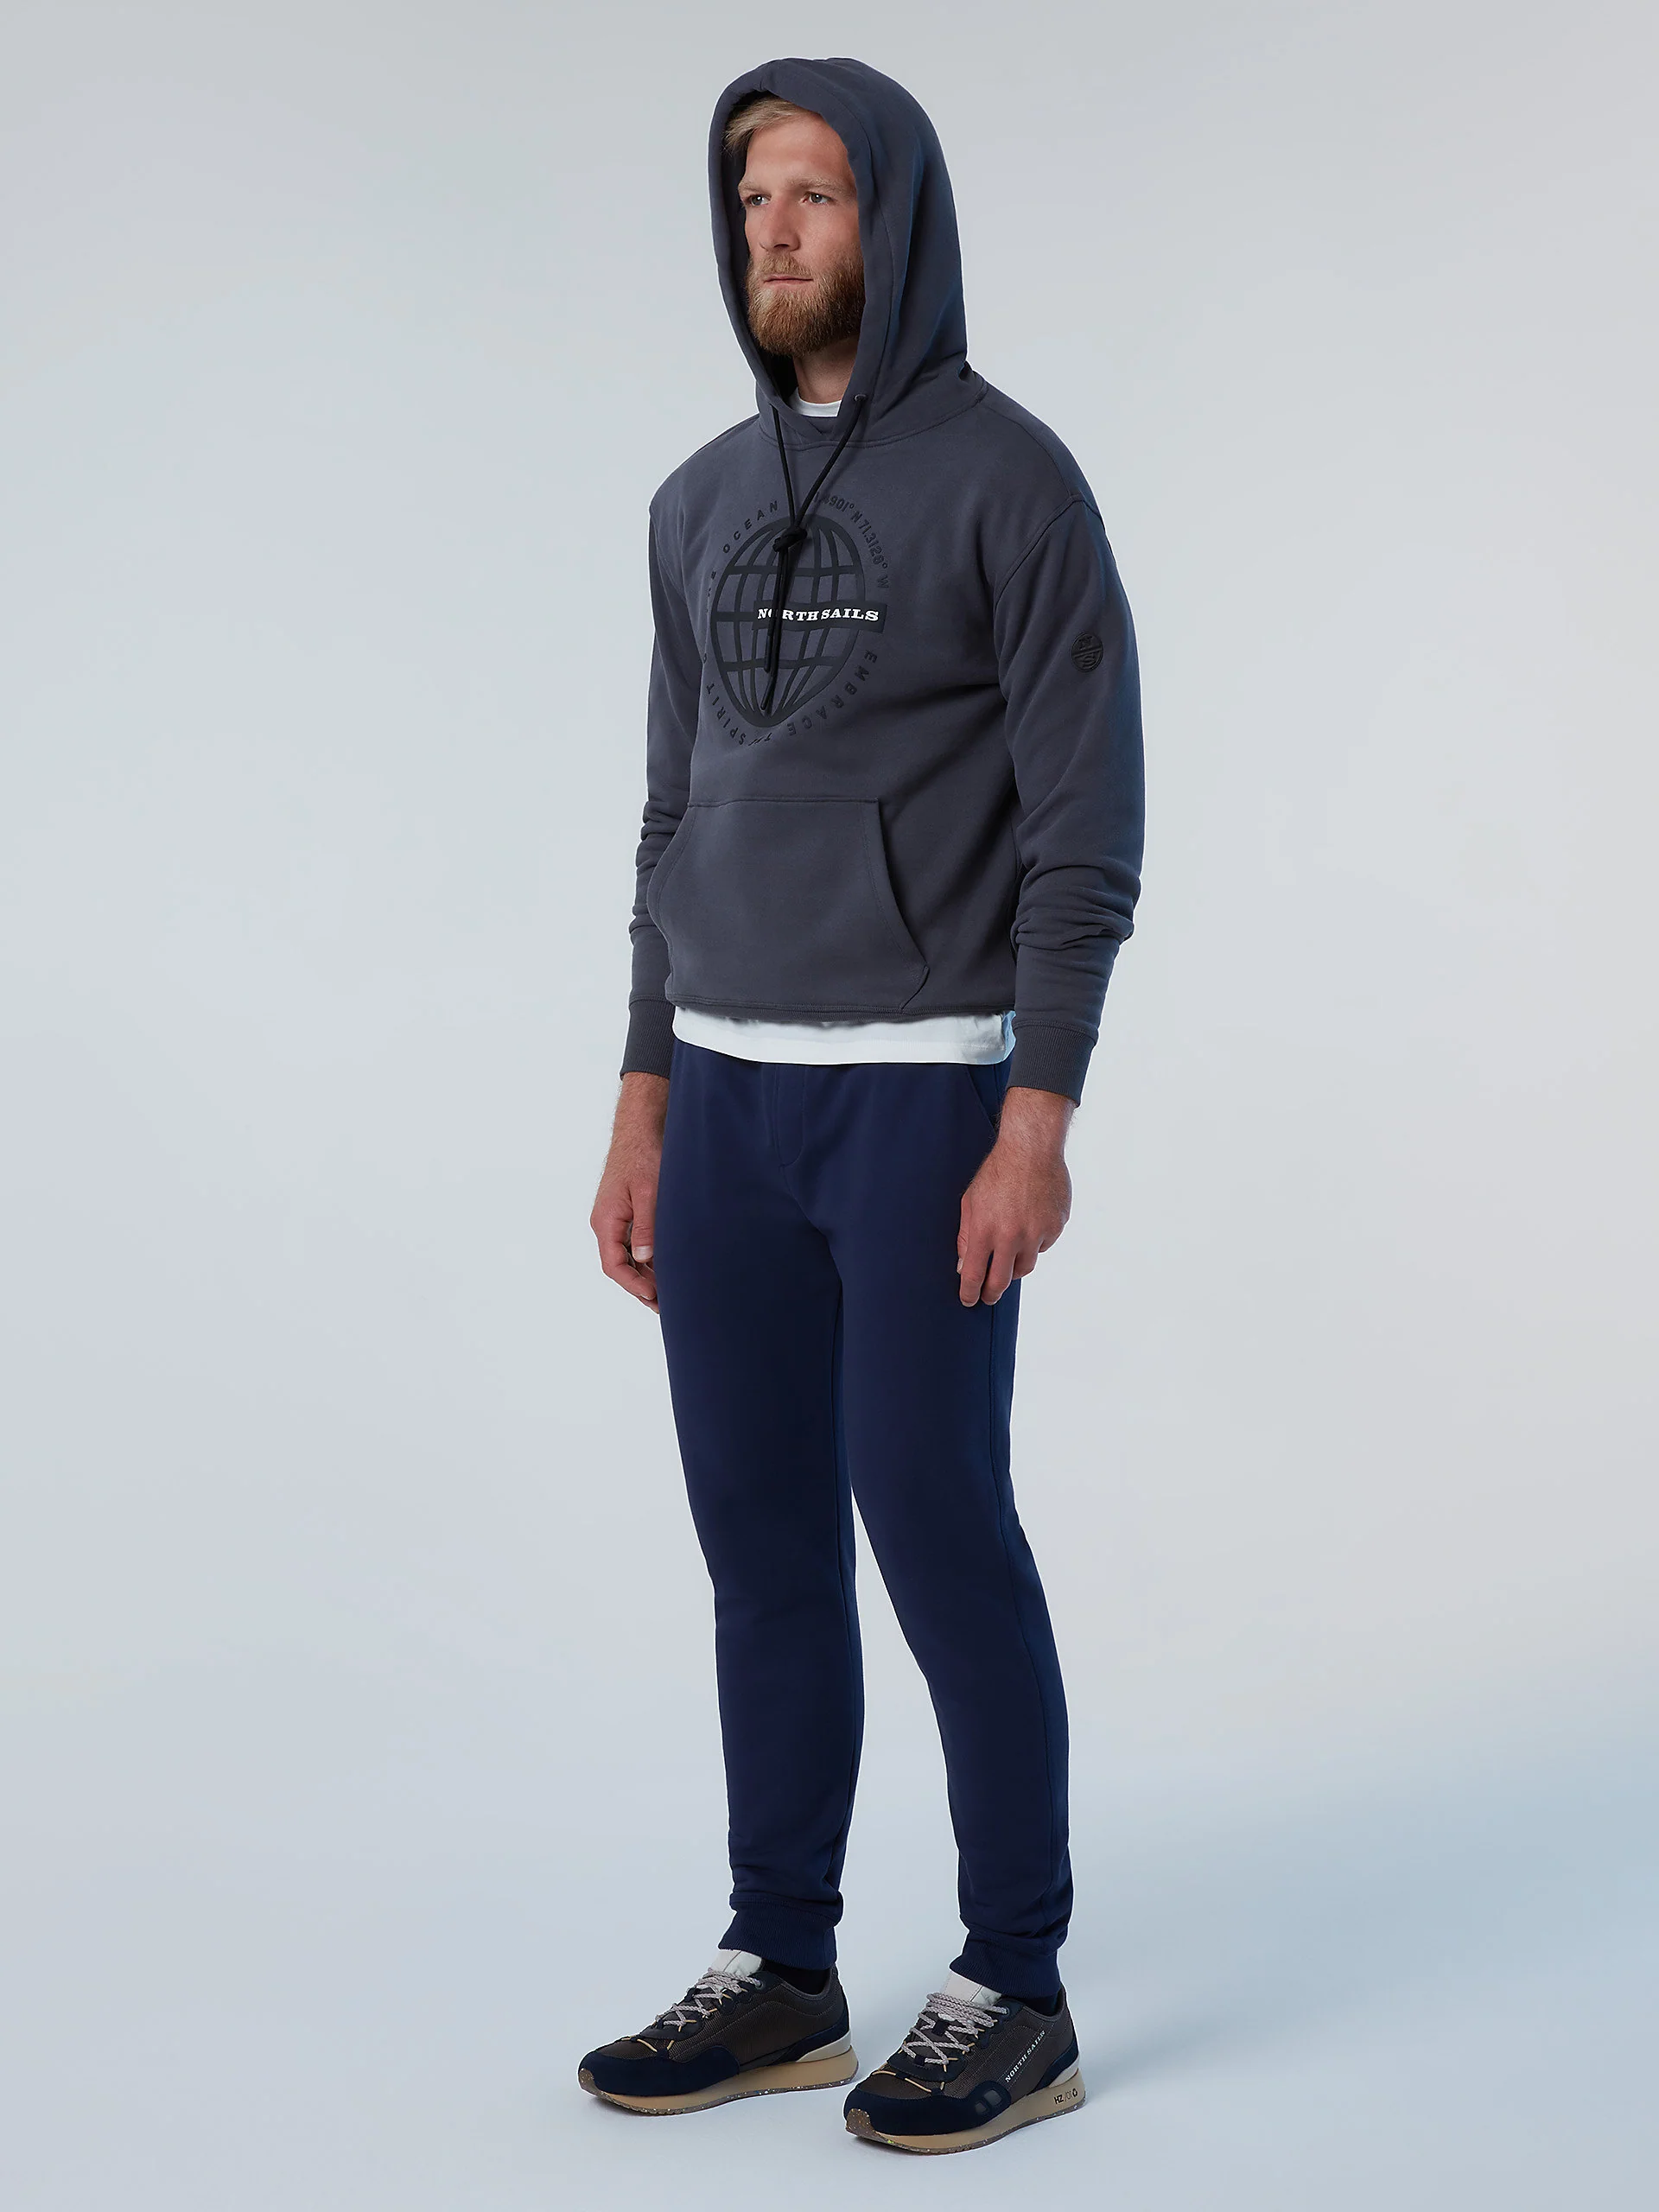 North Sails sweatpants with logo navy blue